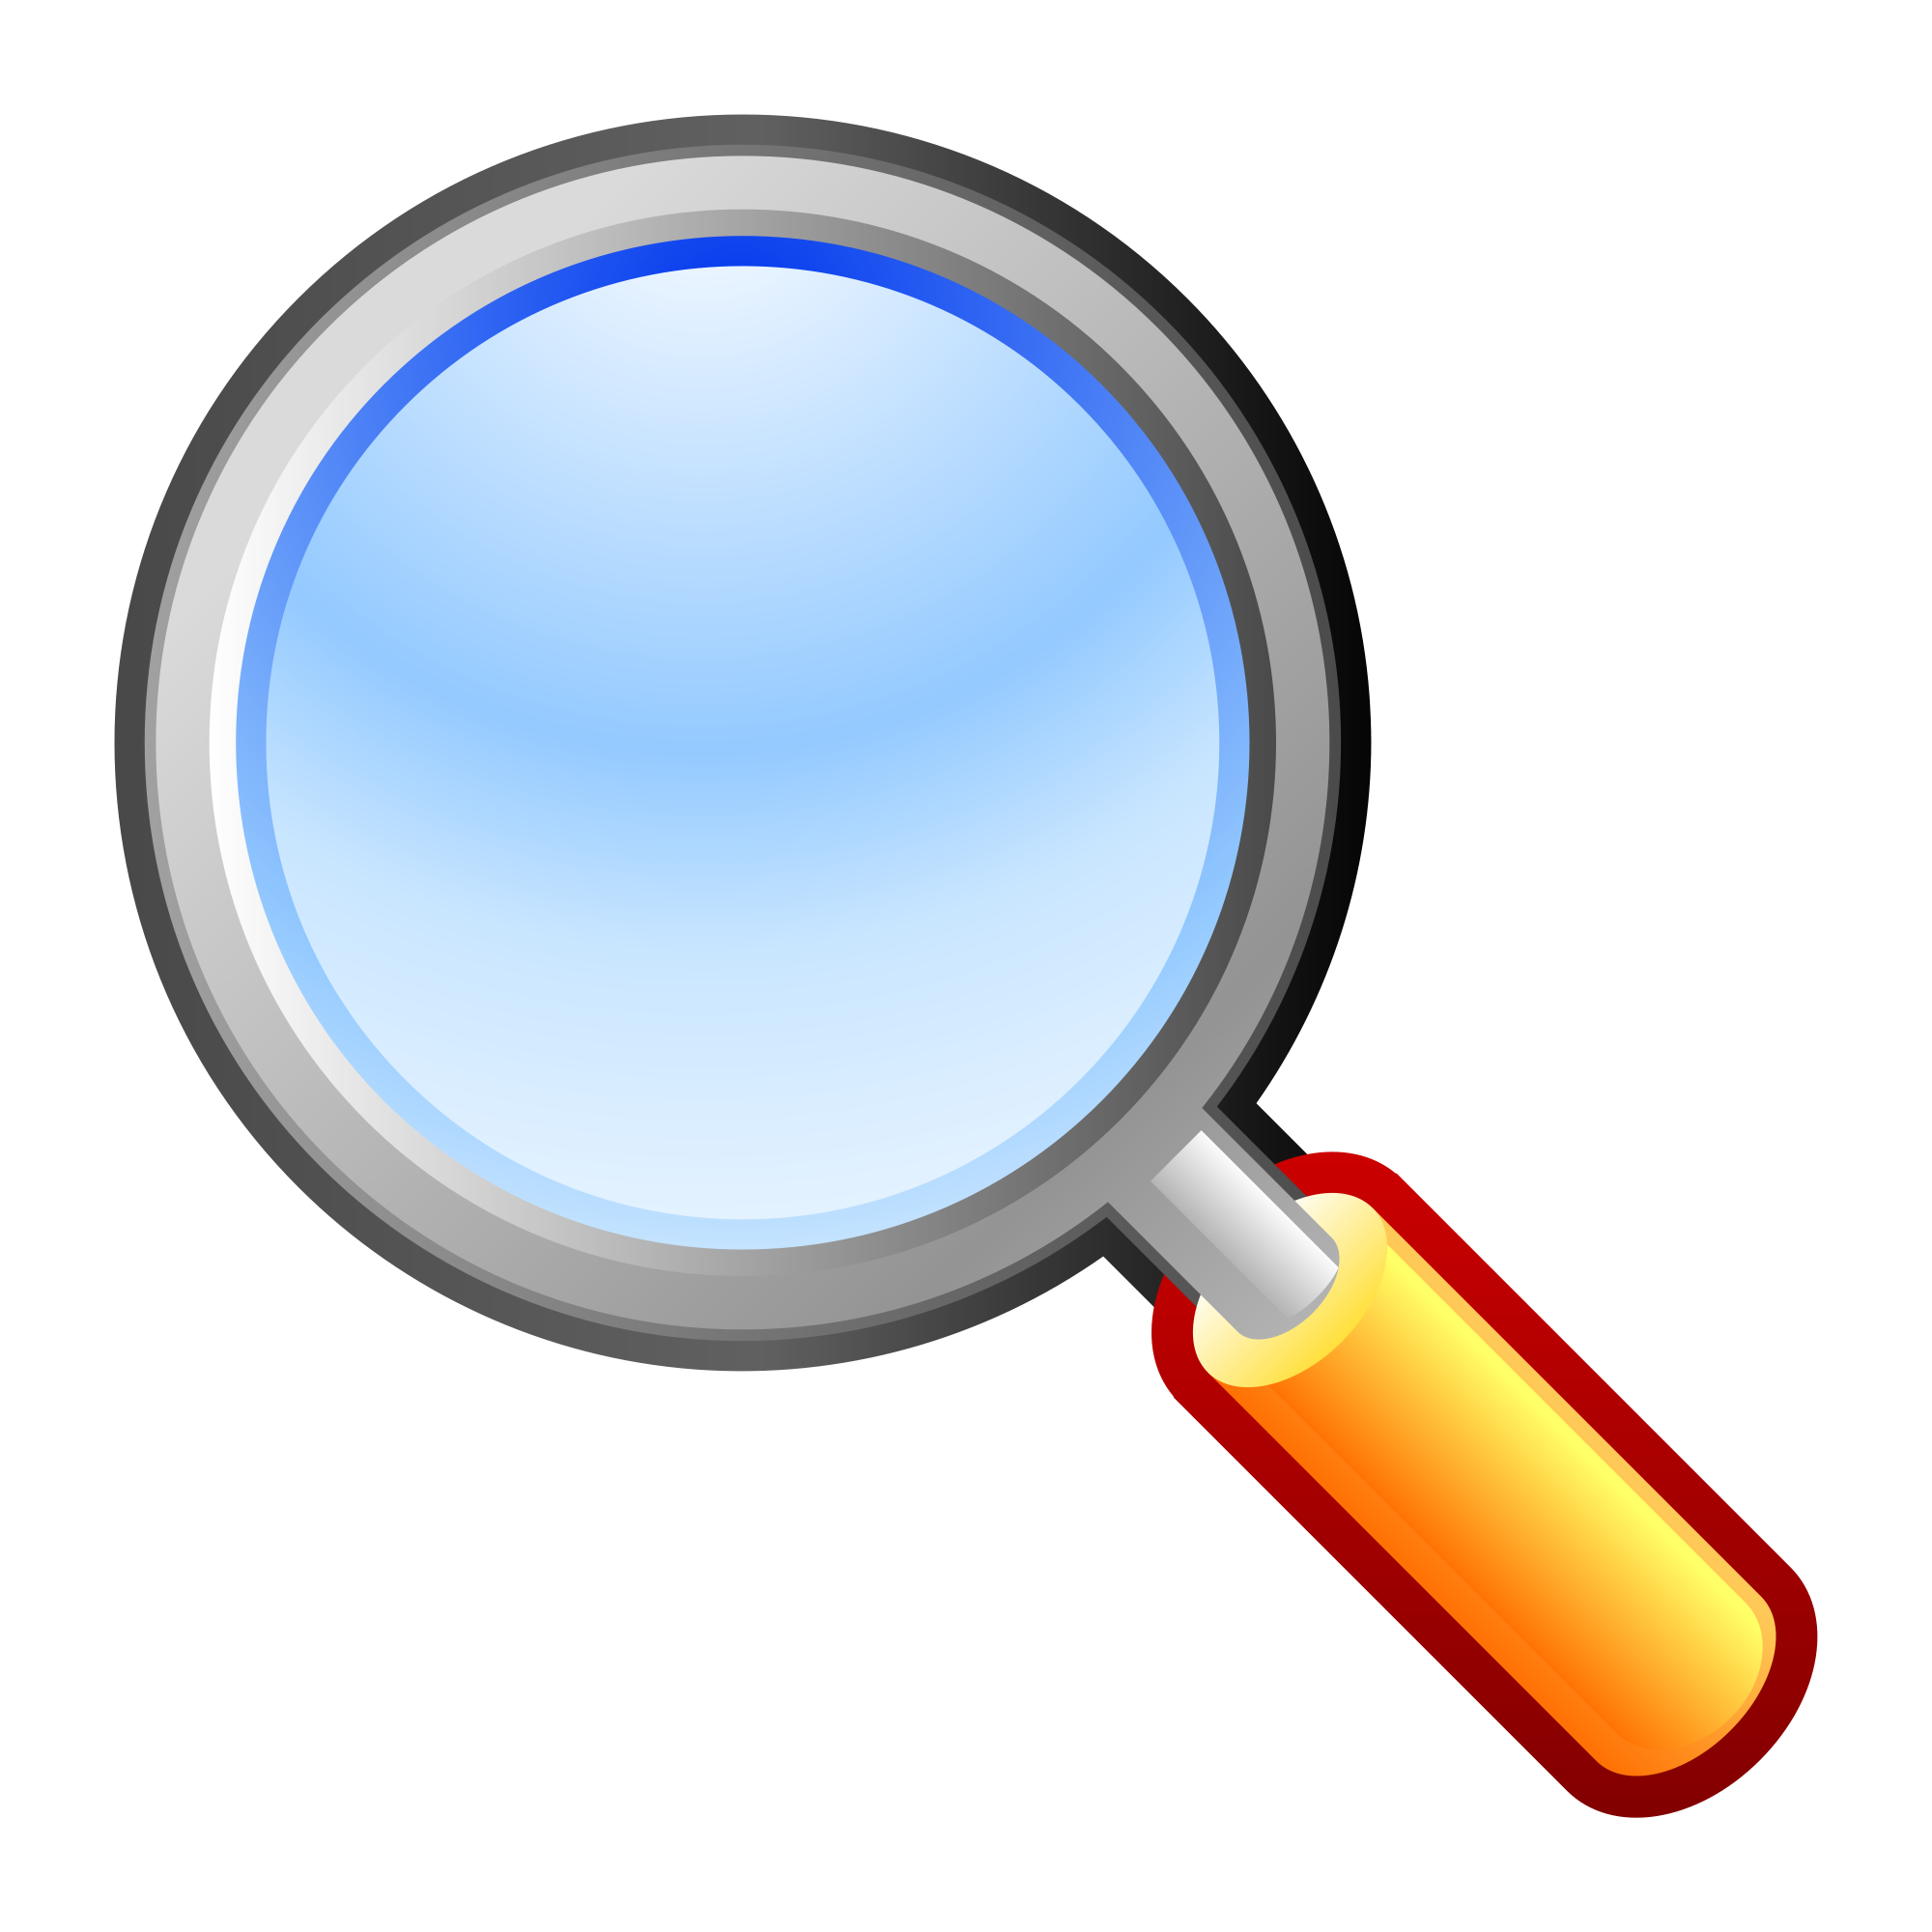 Magnifying Glasses PNG HD Quality